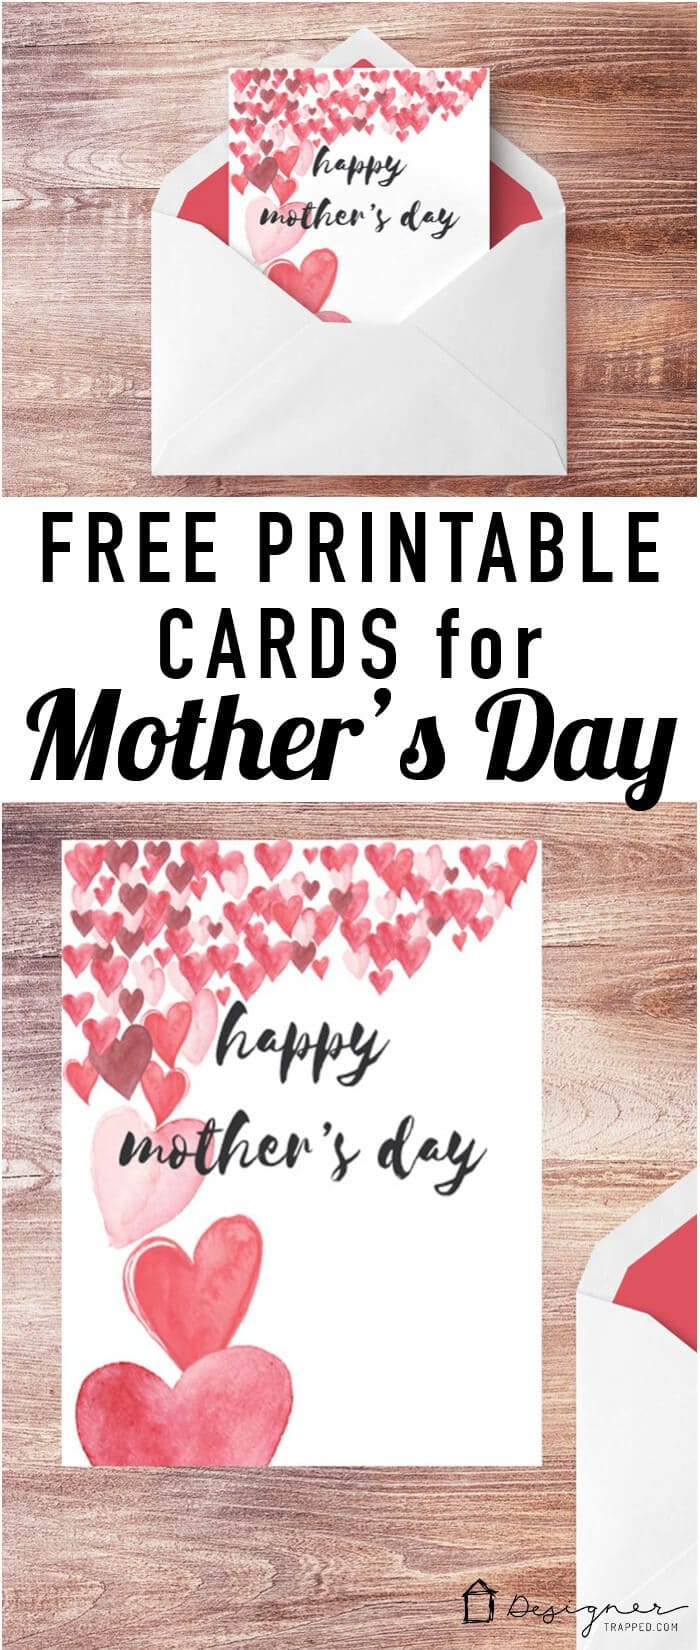 FREE Printable Mother's Day Cards | Kaleidoscope Living